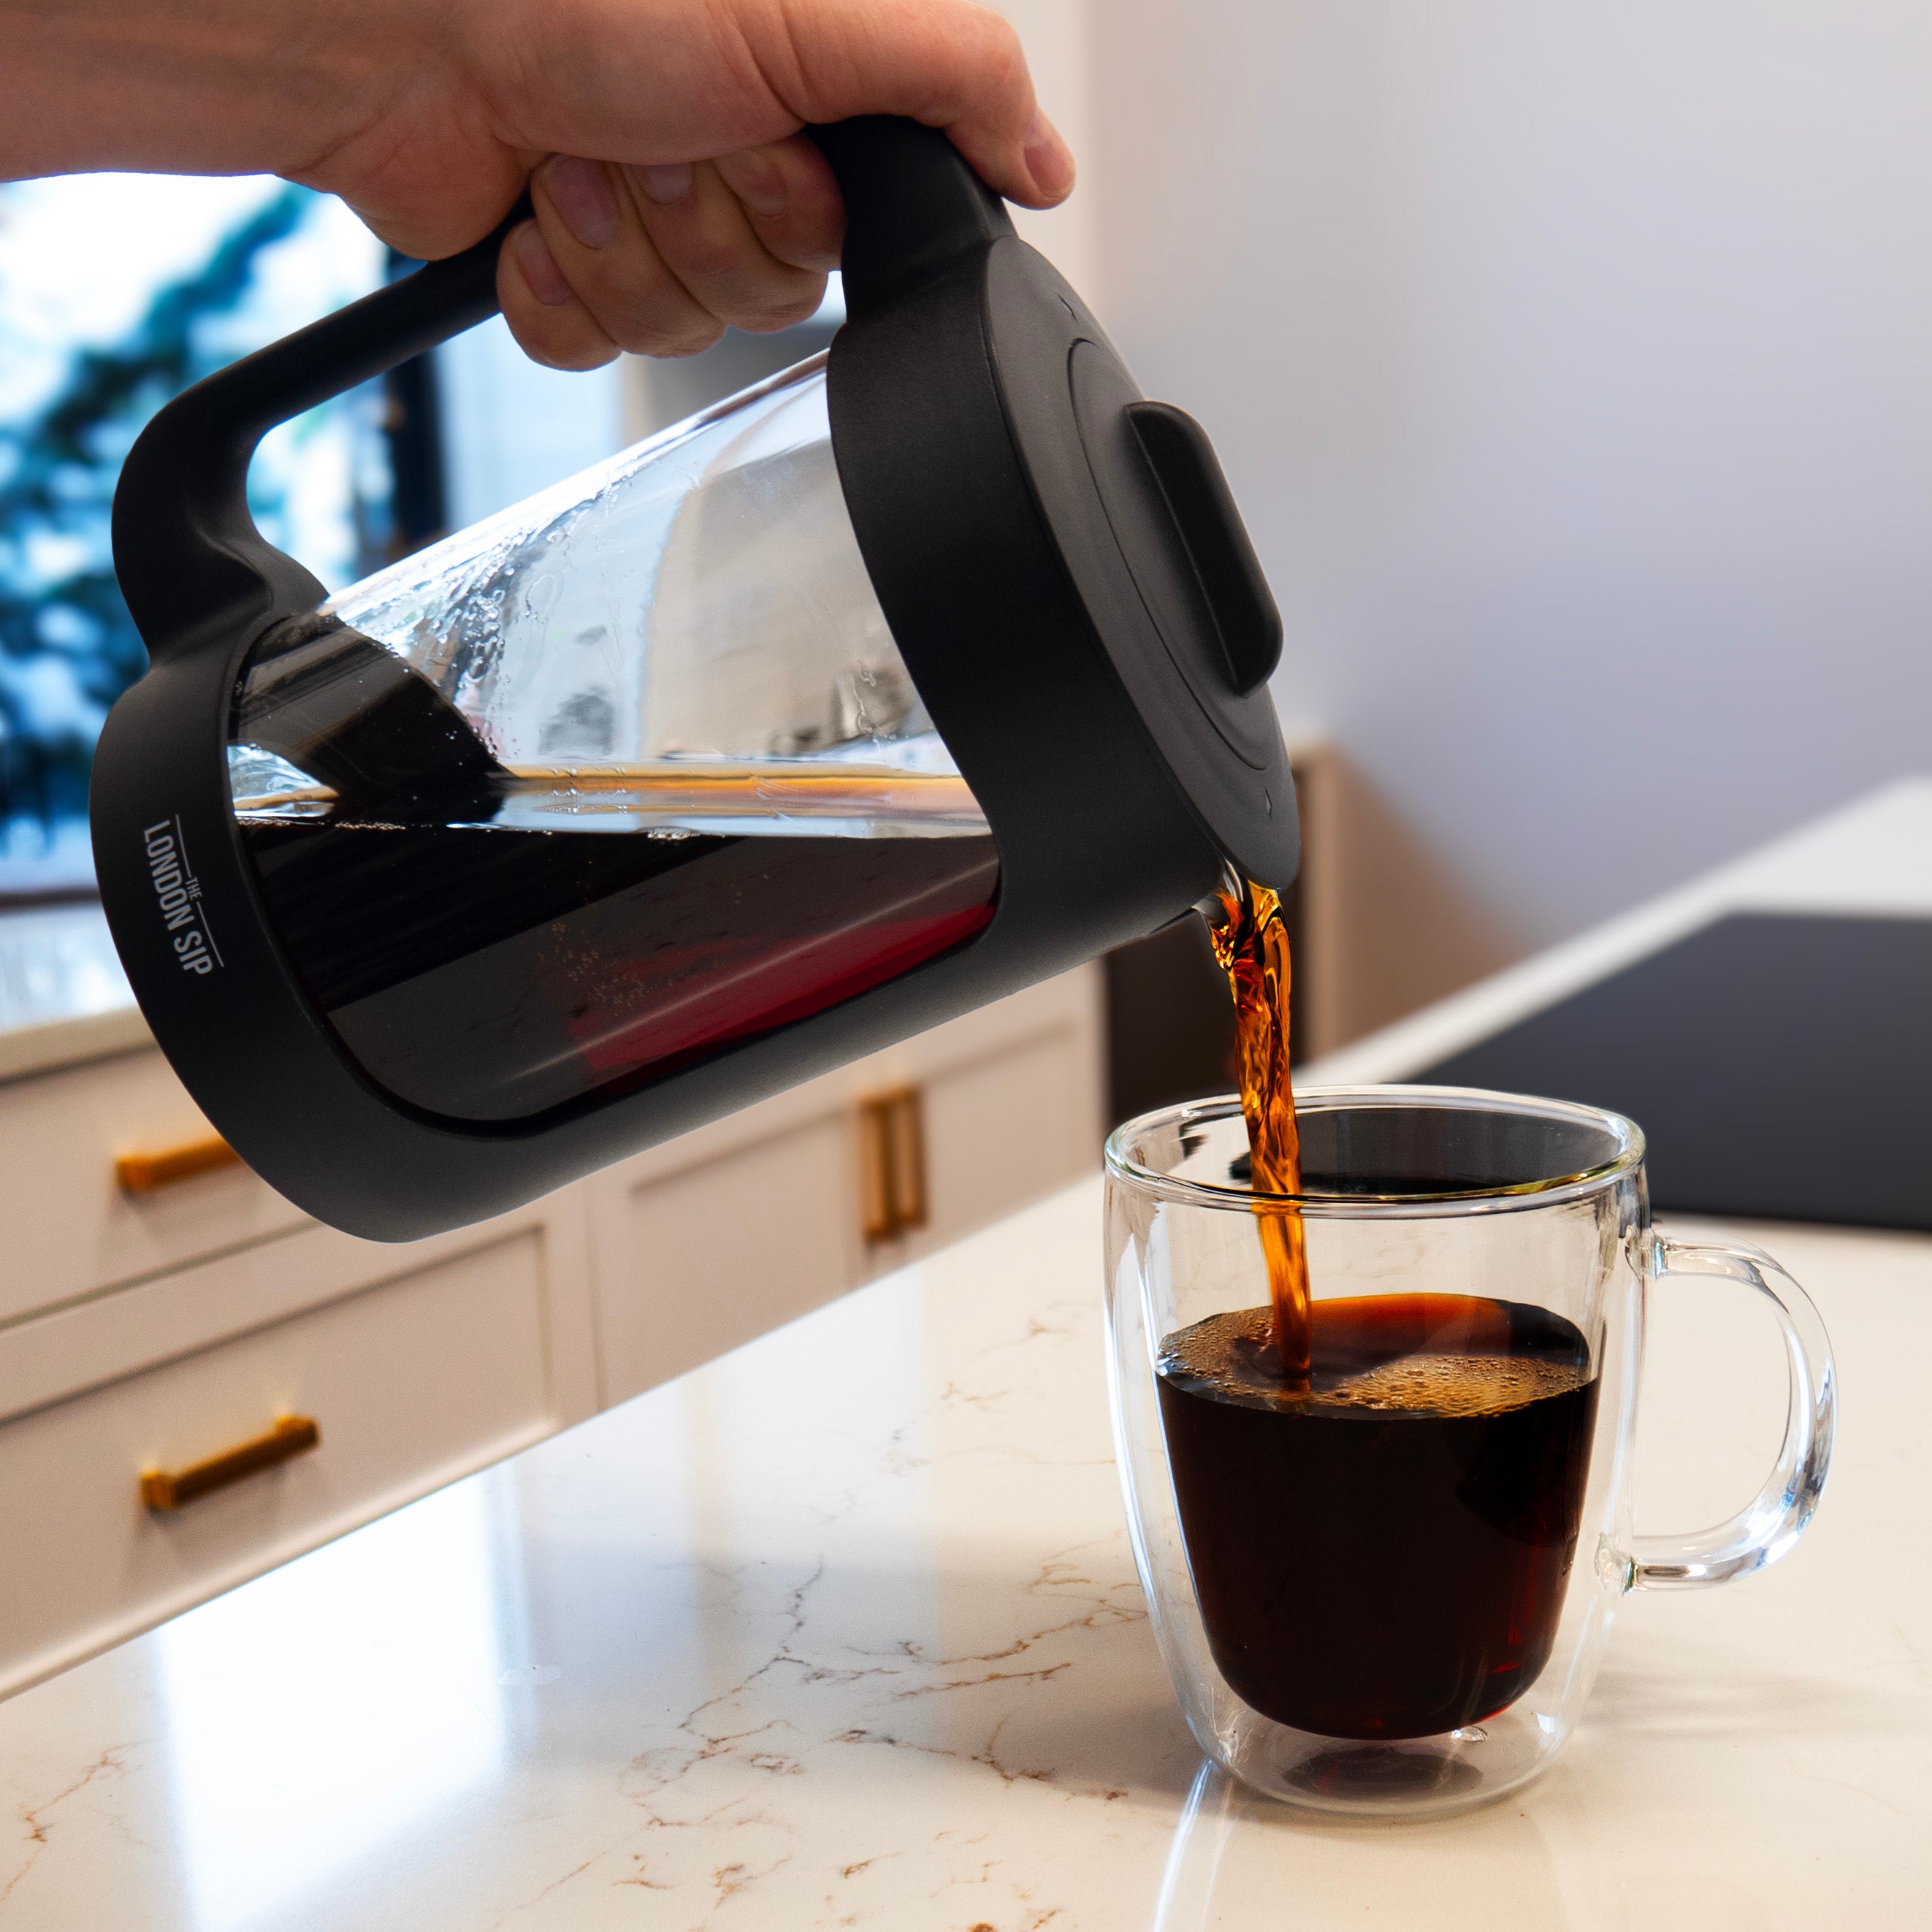 Cold Brew Immersion Coffee Maker